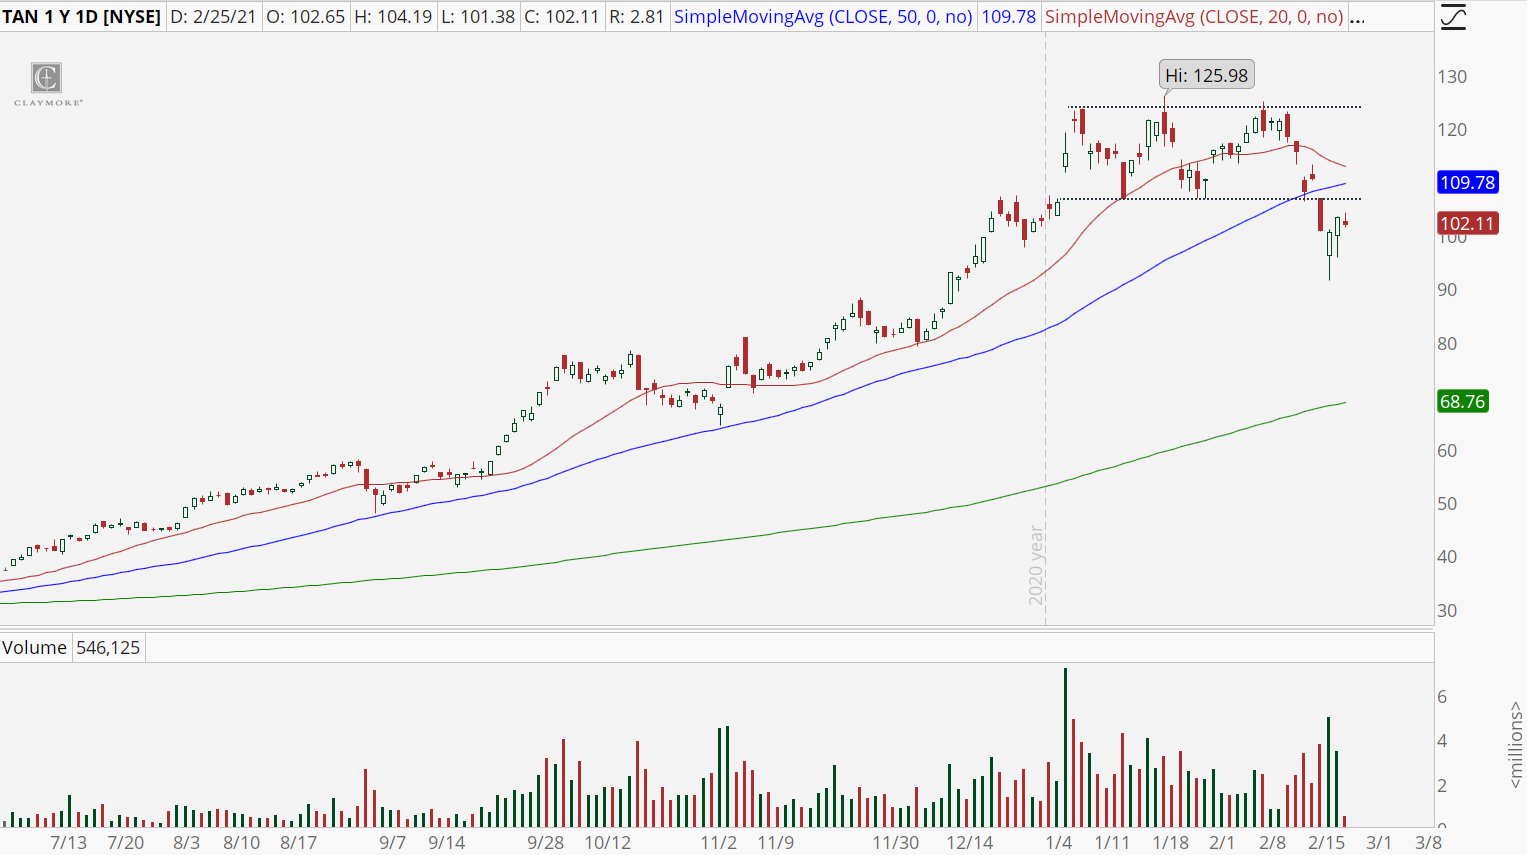 Solar ETF (TAN) with completed topping pattern